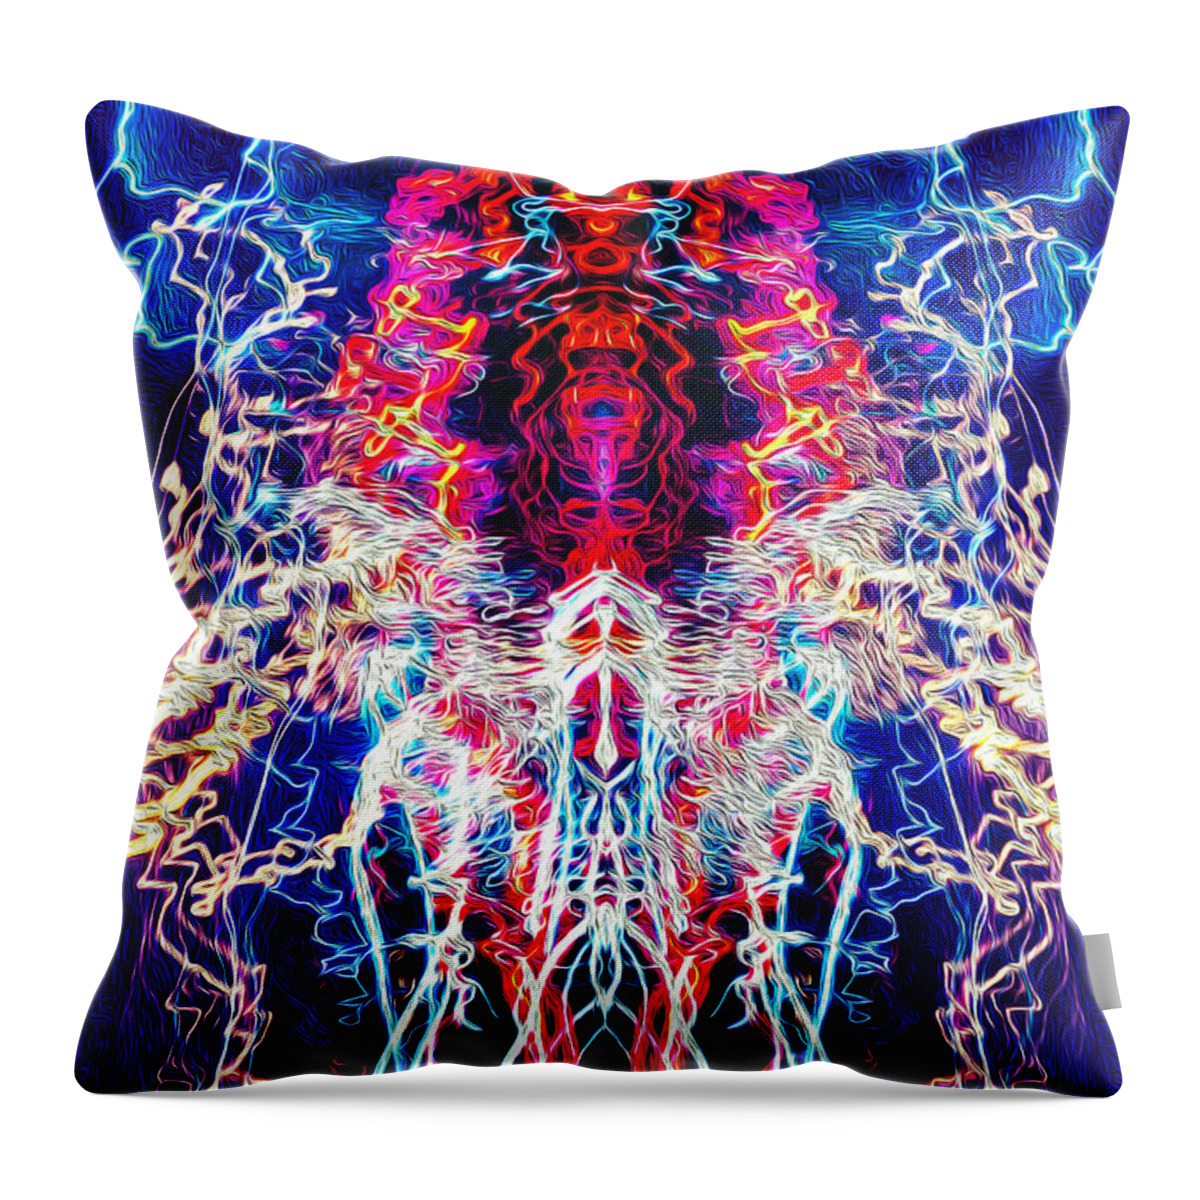 Light Throw Pillow featuring the photograph Abstract Lightpainting Oil Style Unique Poster Image by John Williams